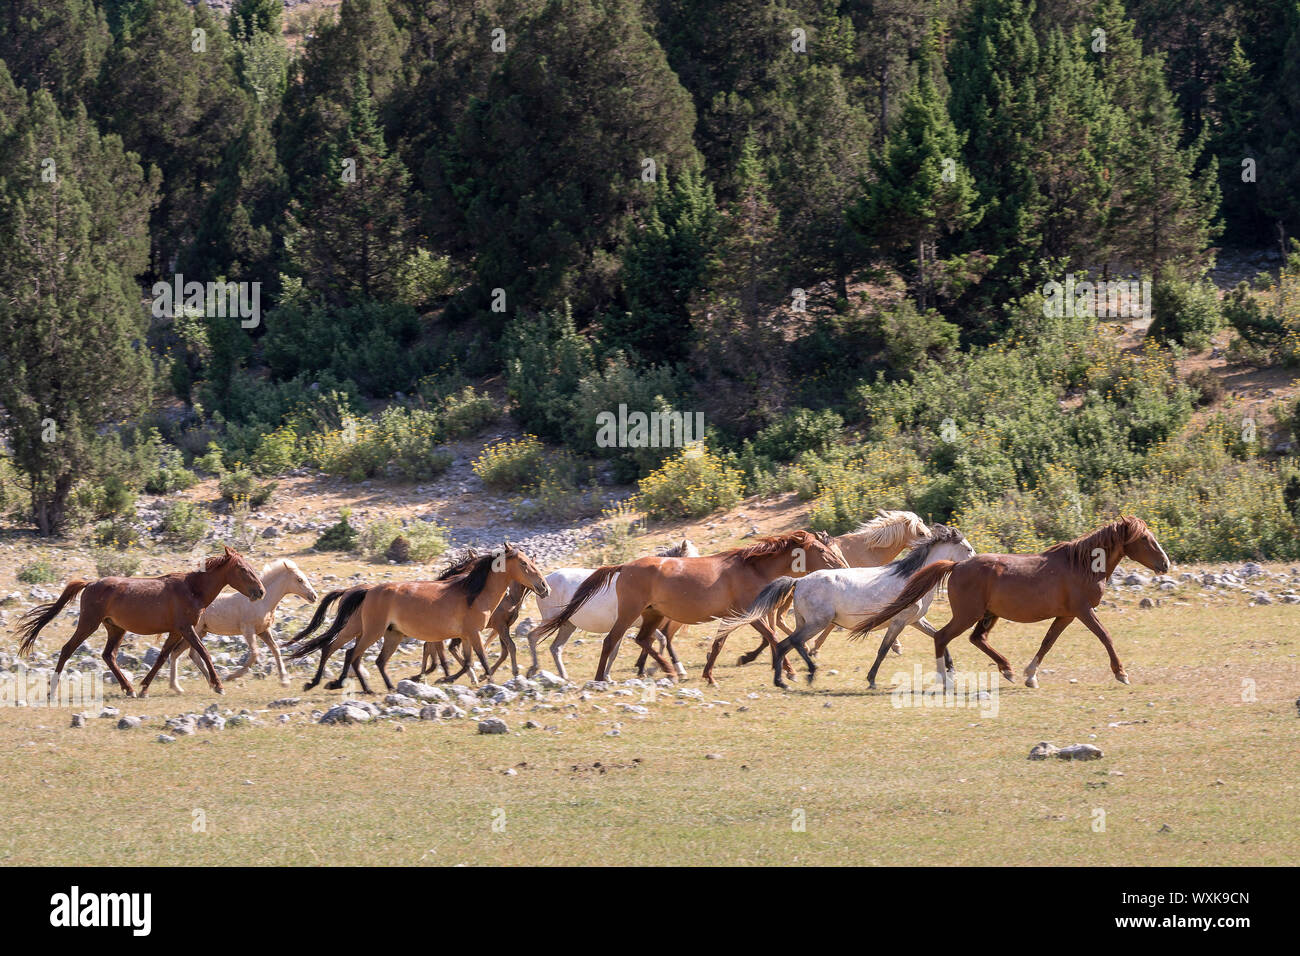 Feral horse, wild horse. Herd of mares trotting in landscape. Turkey Stock Photo